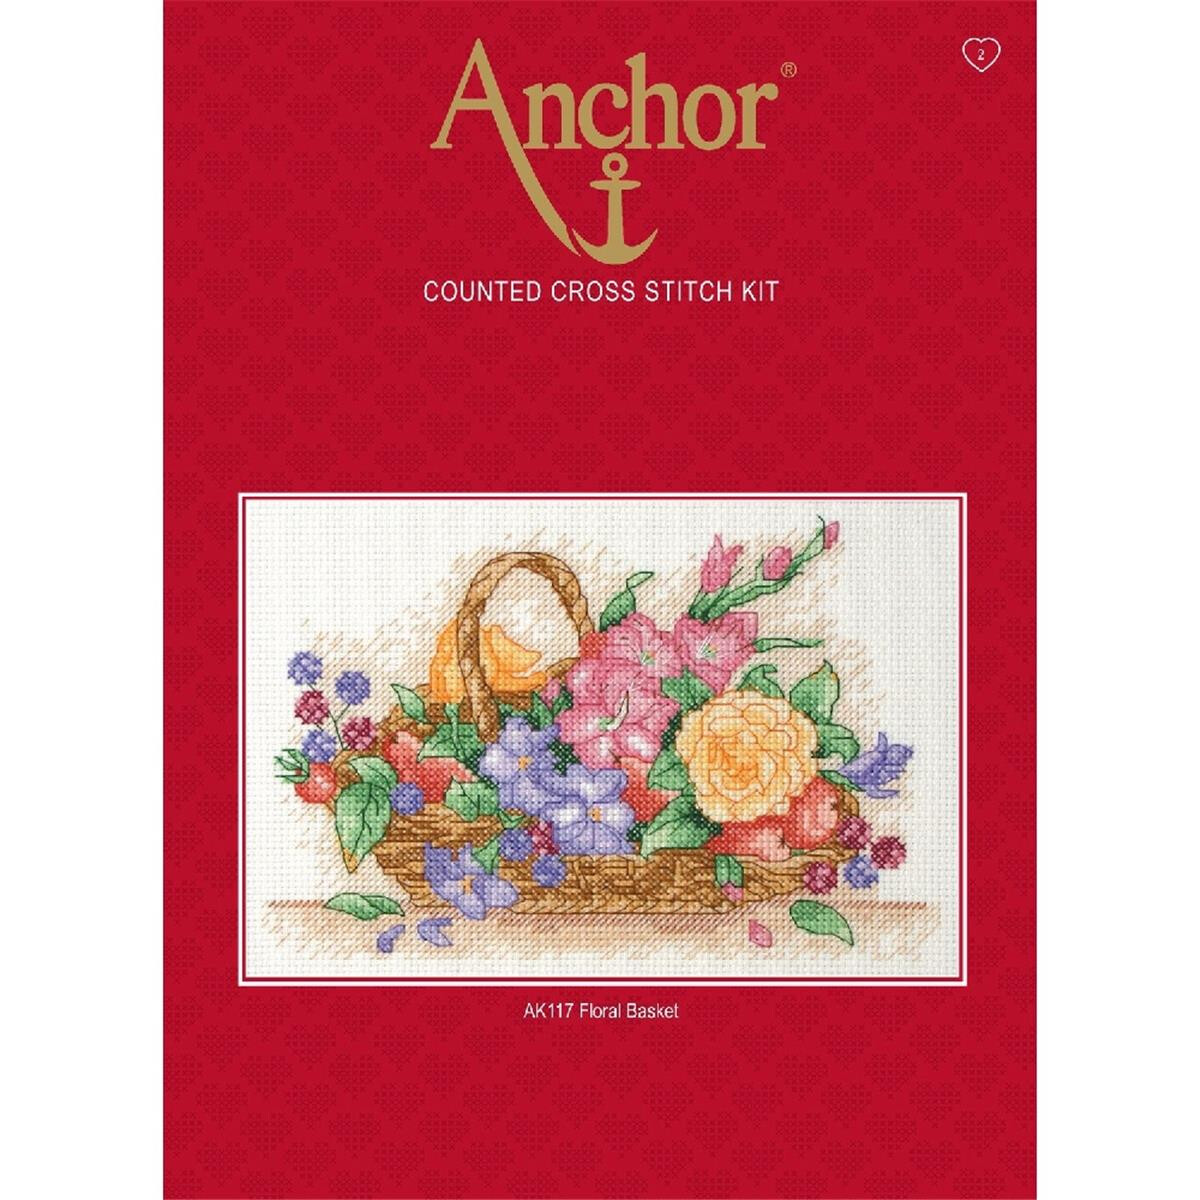 Anchor counted Cross Stitch kit "Floral...